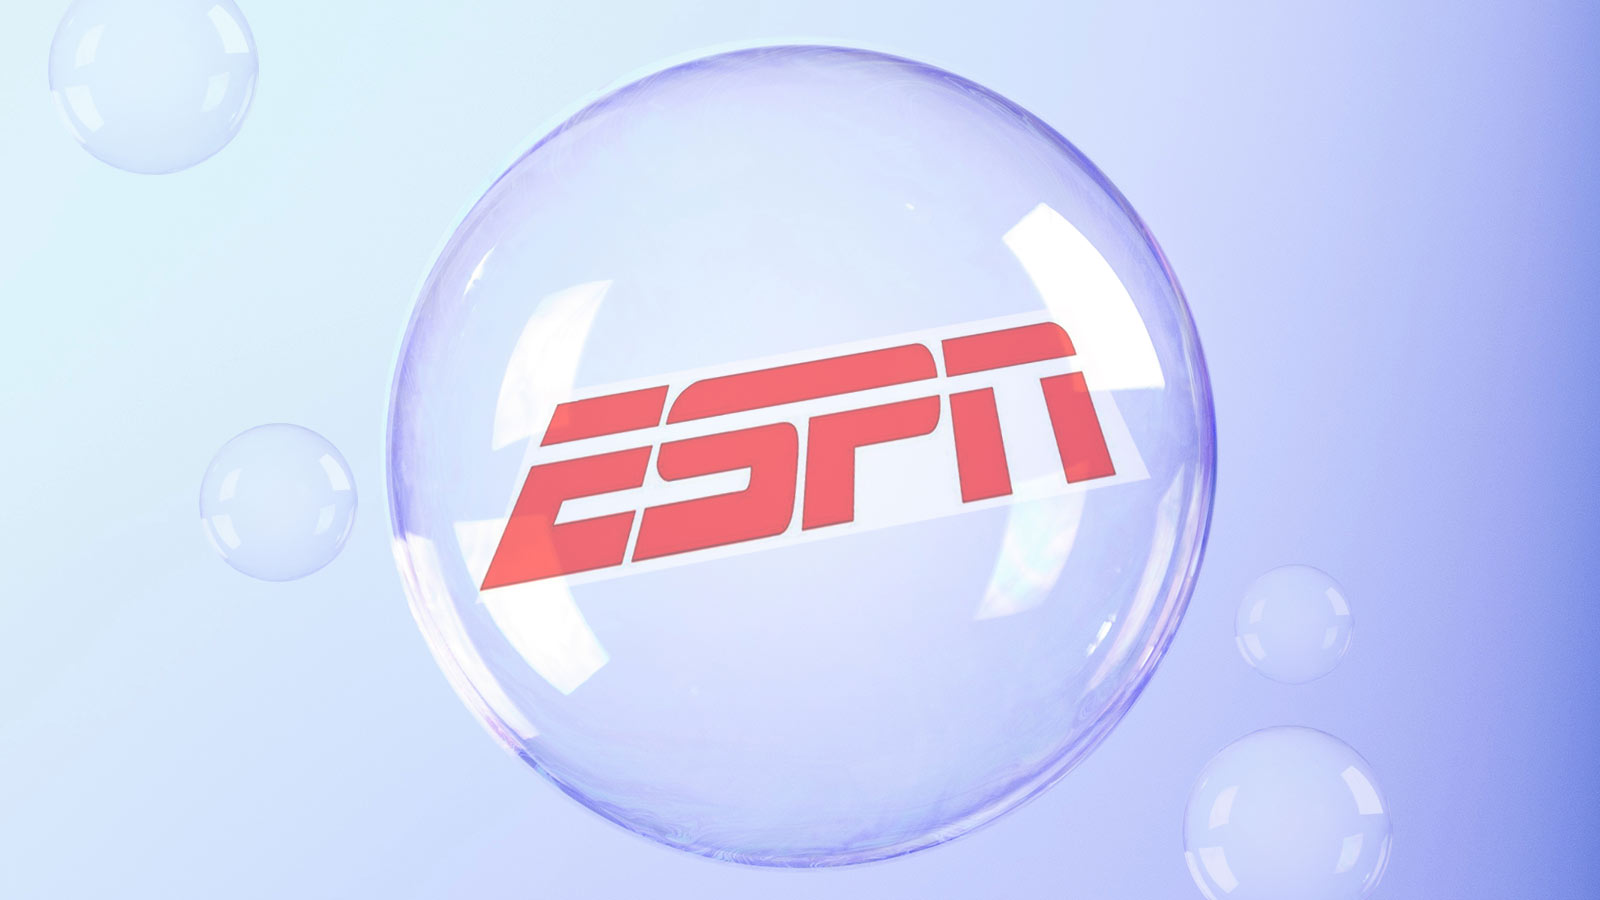 Espn Cutting Nearly $100 Million In On-air Talent - Nissan Versa , HD Wallpaper & Backgrounds